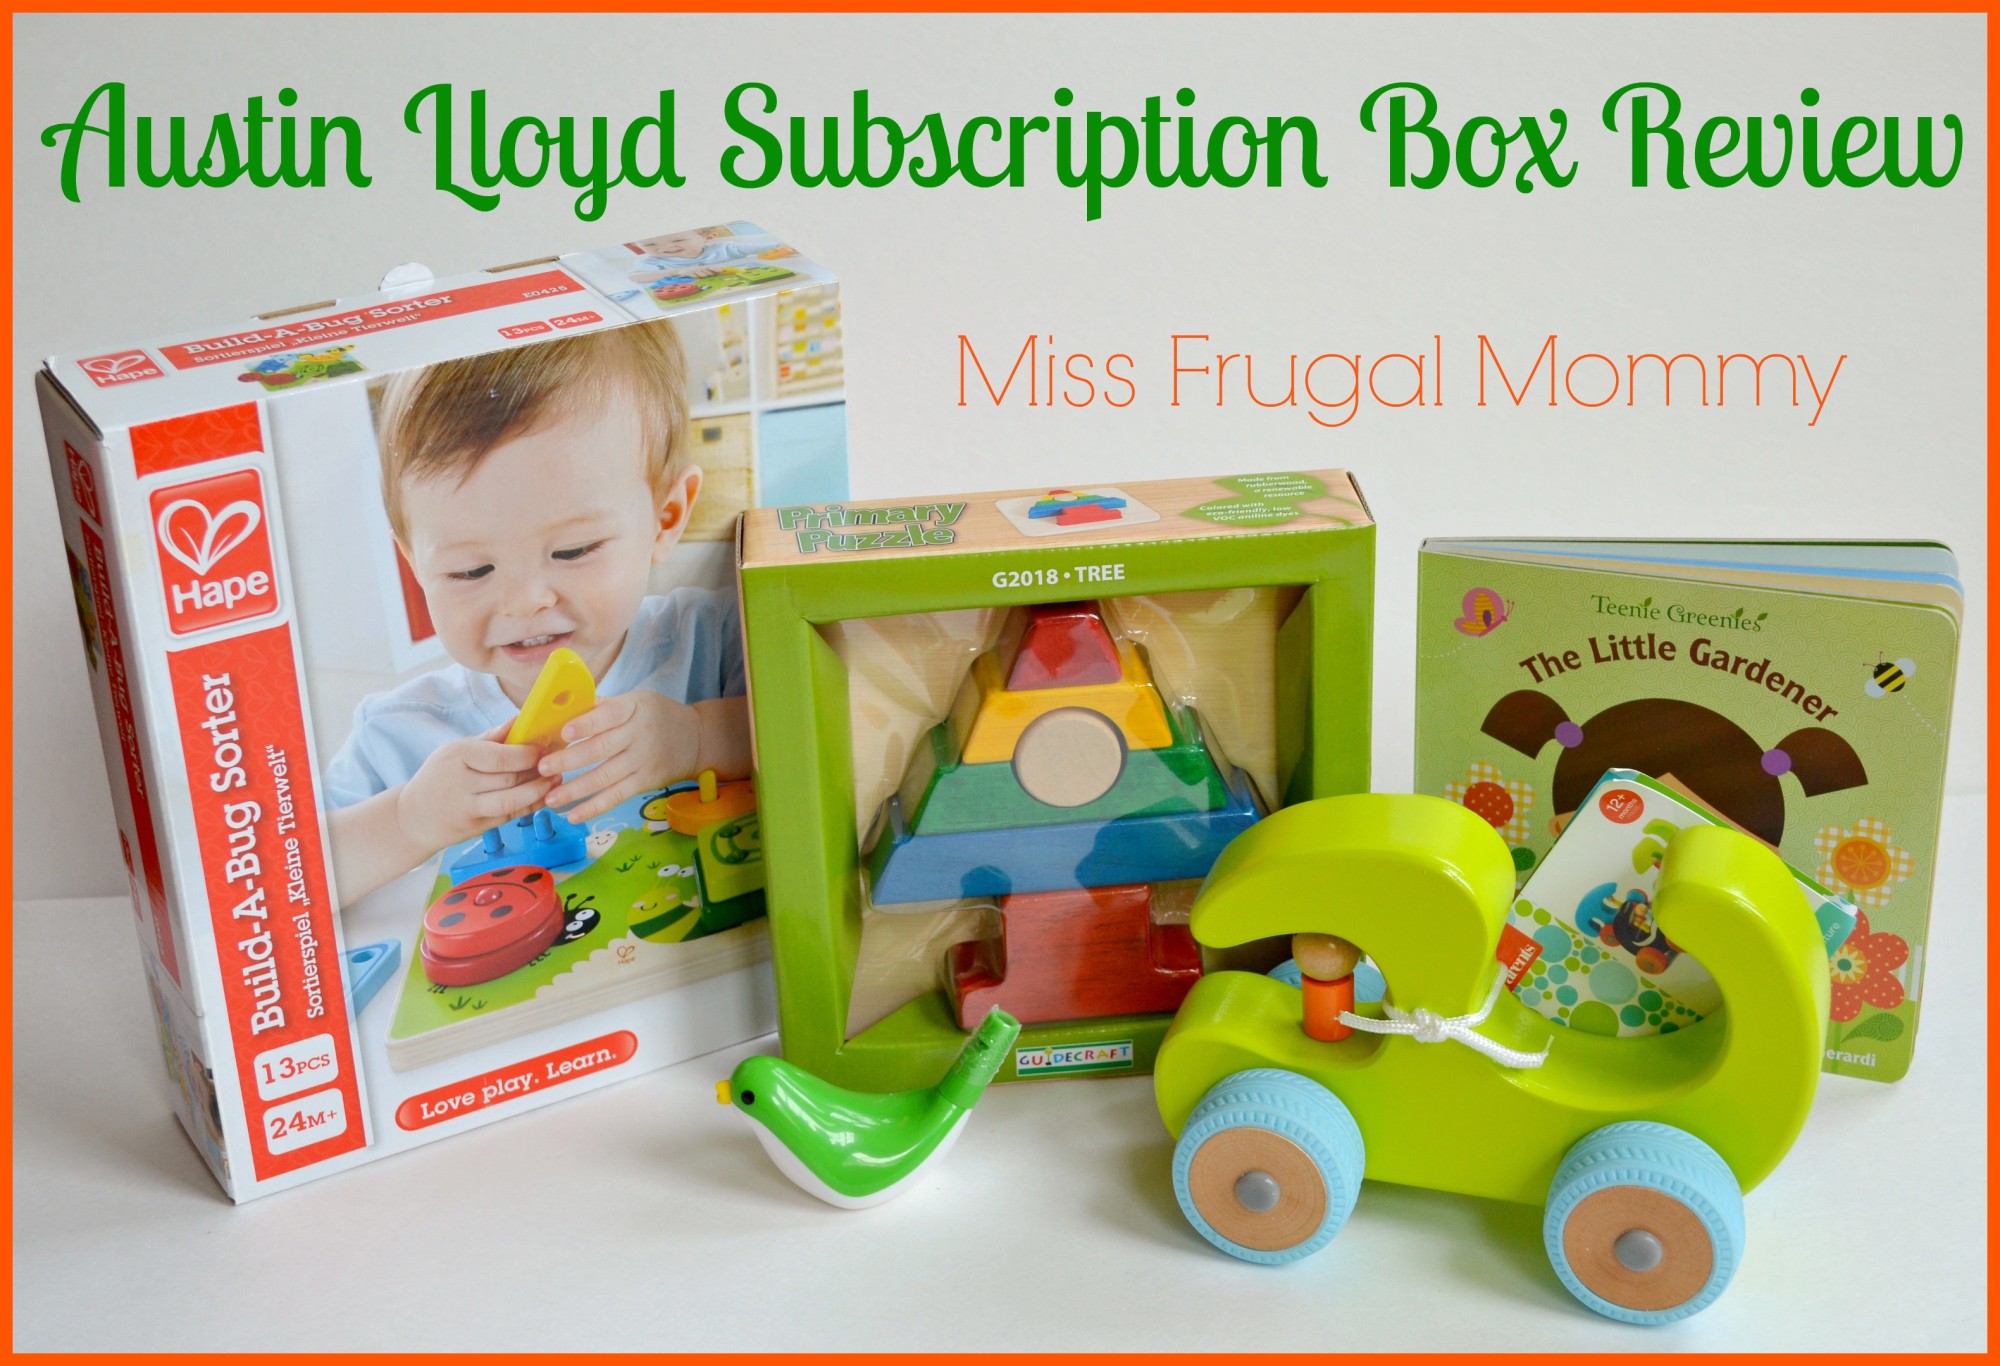 Subscription Boxes For Kids